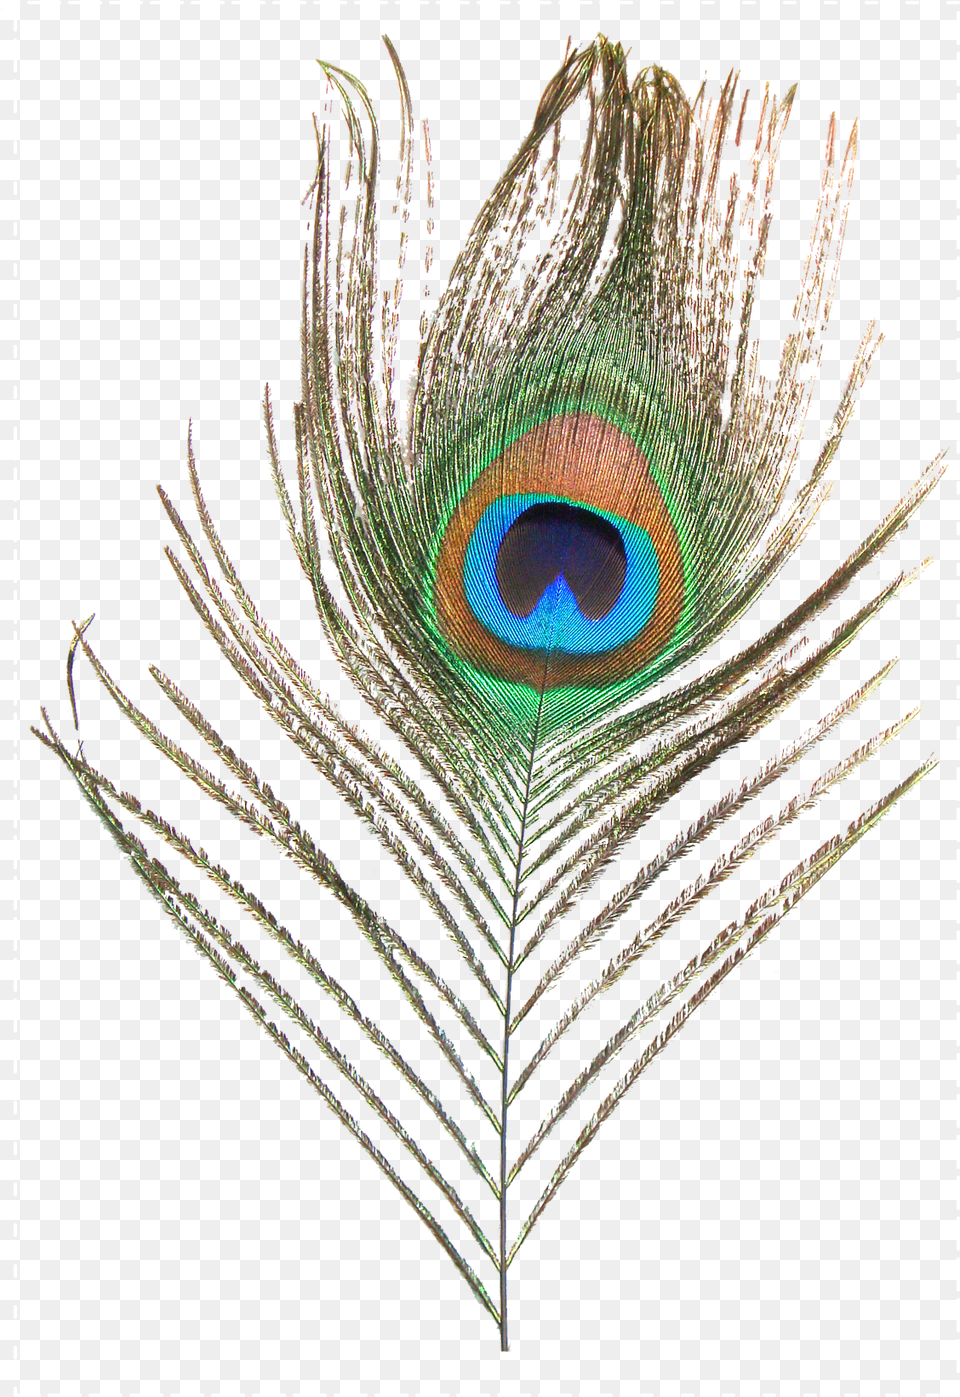 Feather Peafowl Clip Art Peacock Feather Images, Plant, Animal, Bird Png